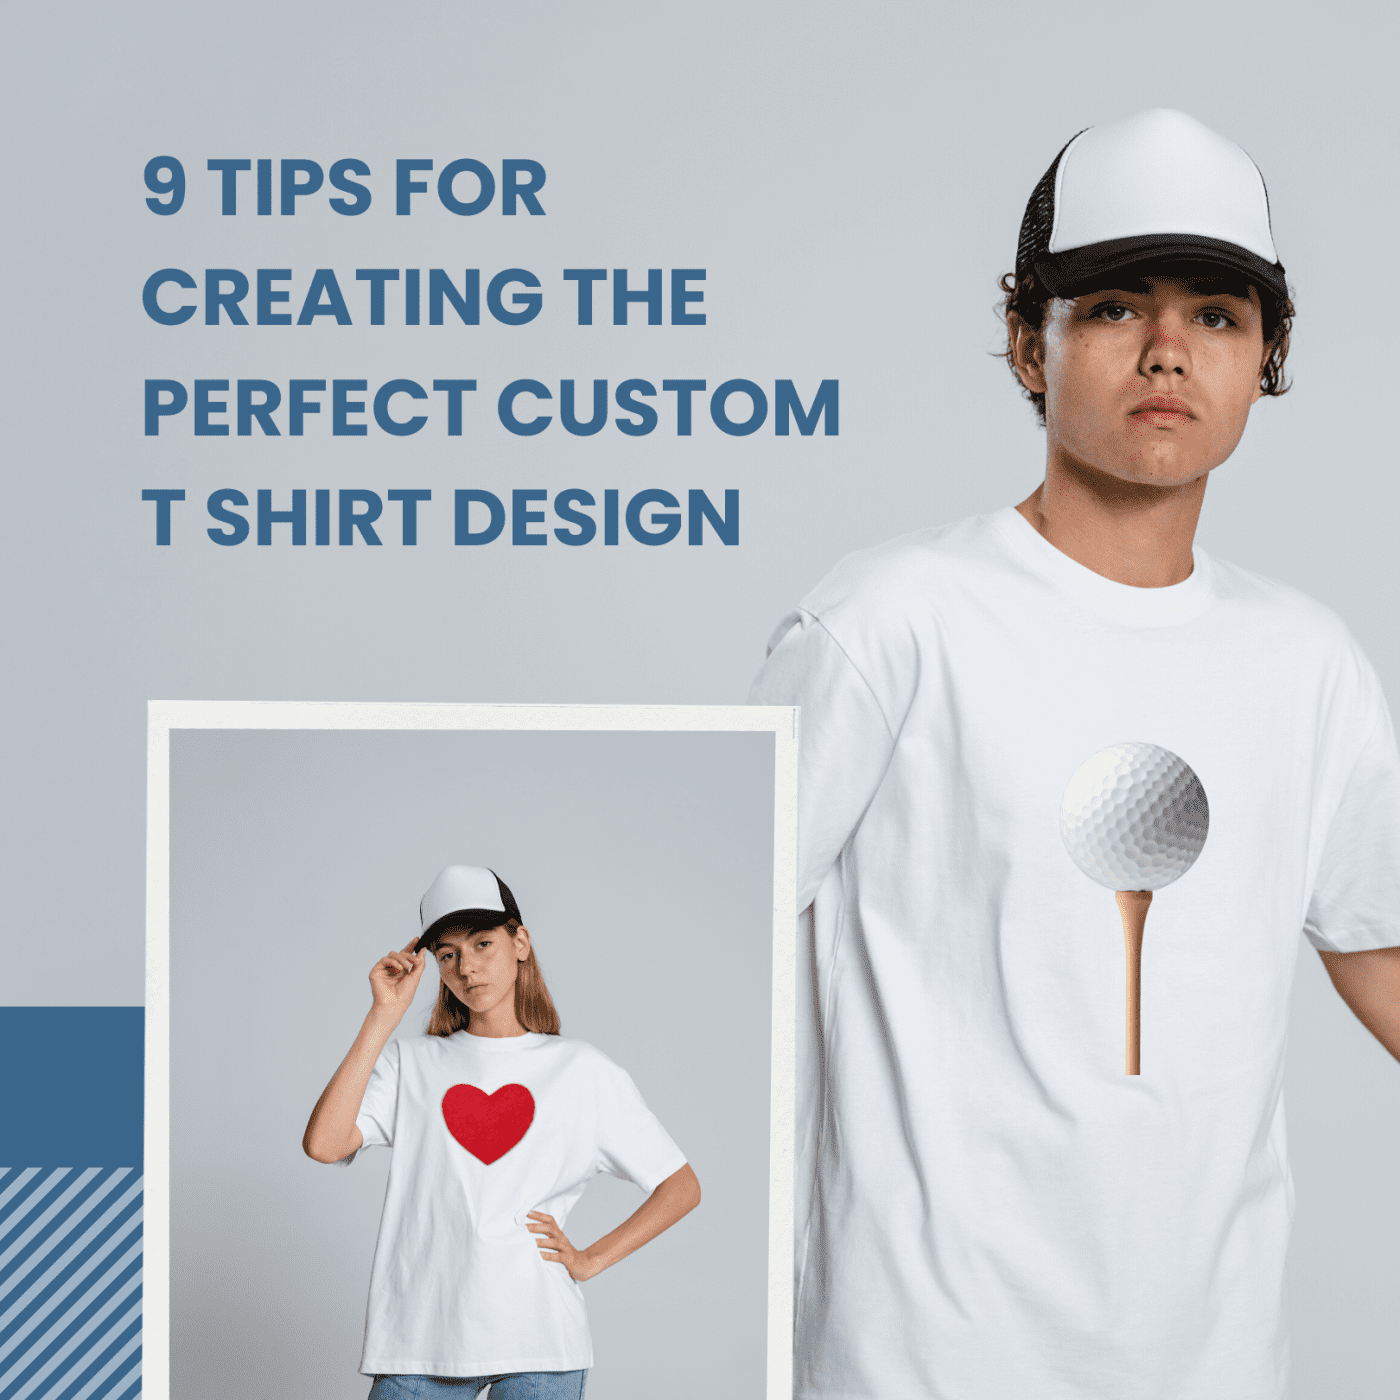 9 Tips for Creating the Perfect Custom T Shirt Design, custom t shirt design, custom t shirt, custom t-shirts, t-shirt printing, tshirt printing, t shirt printing